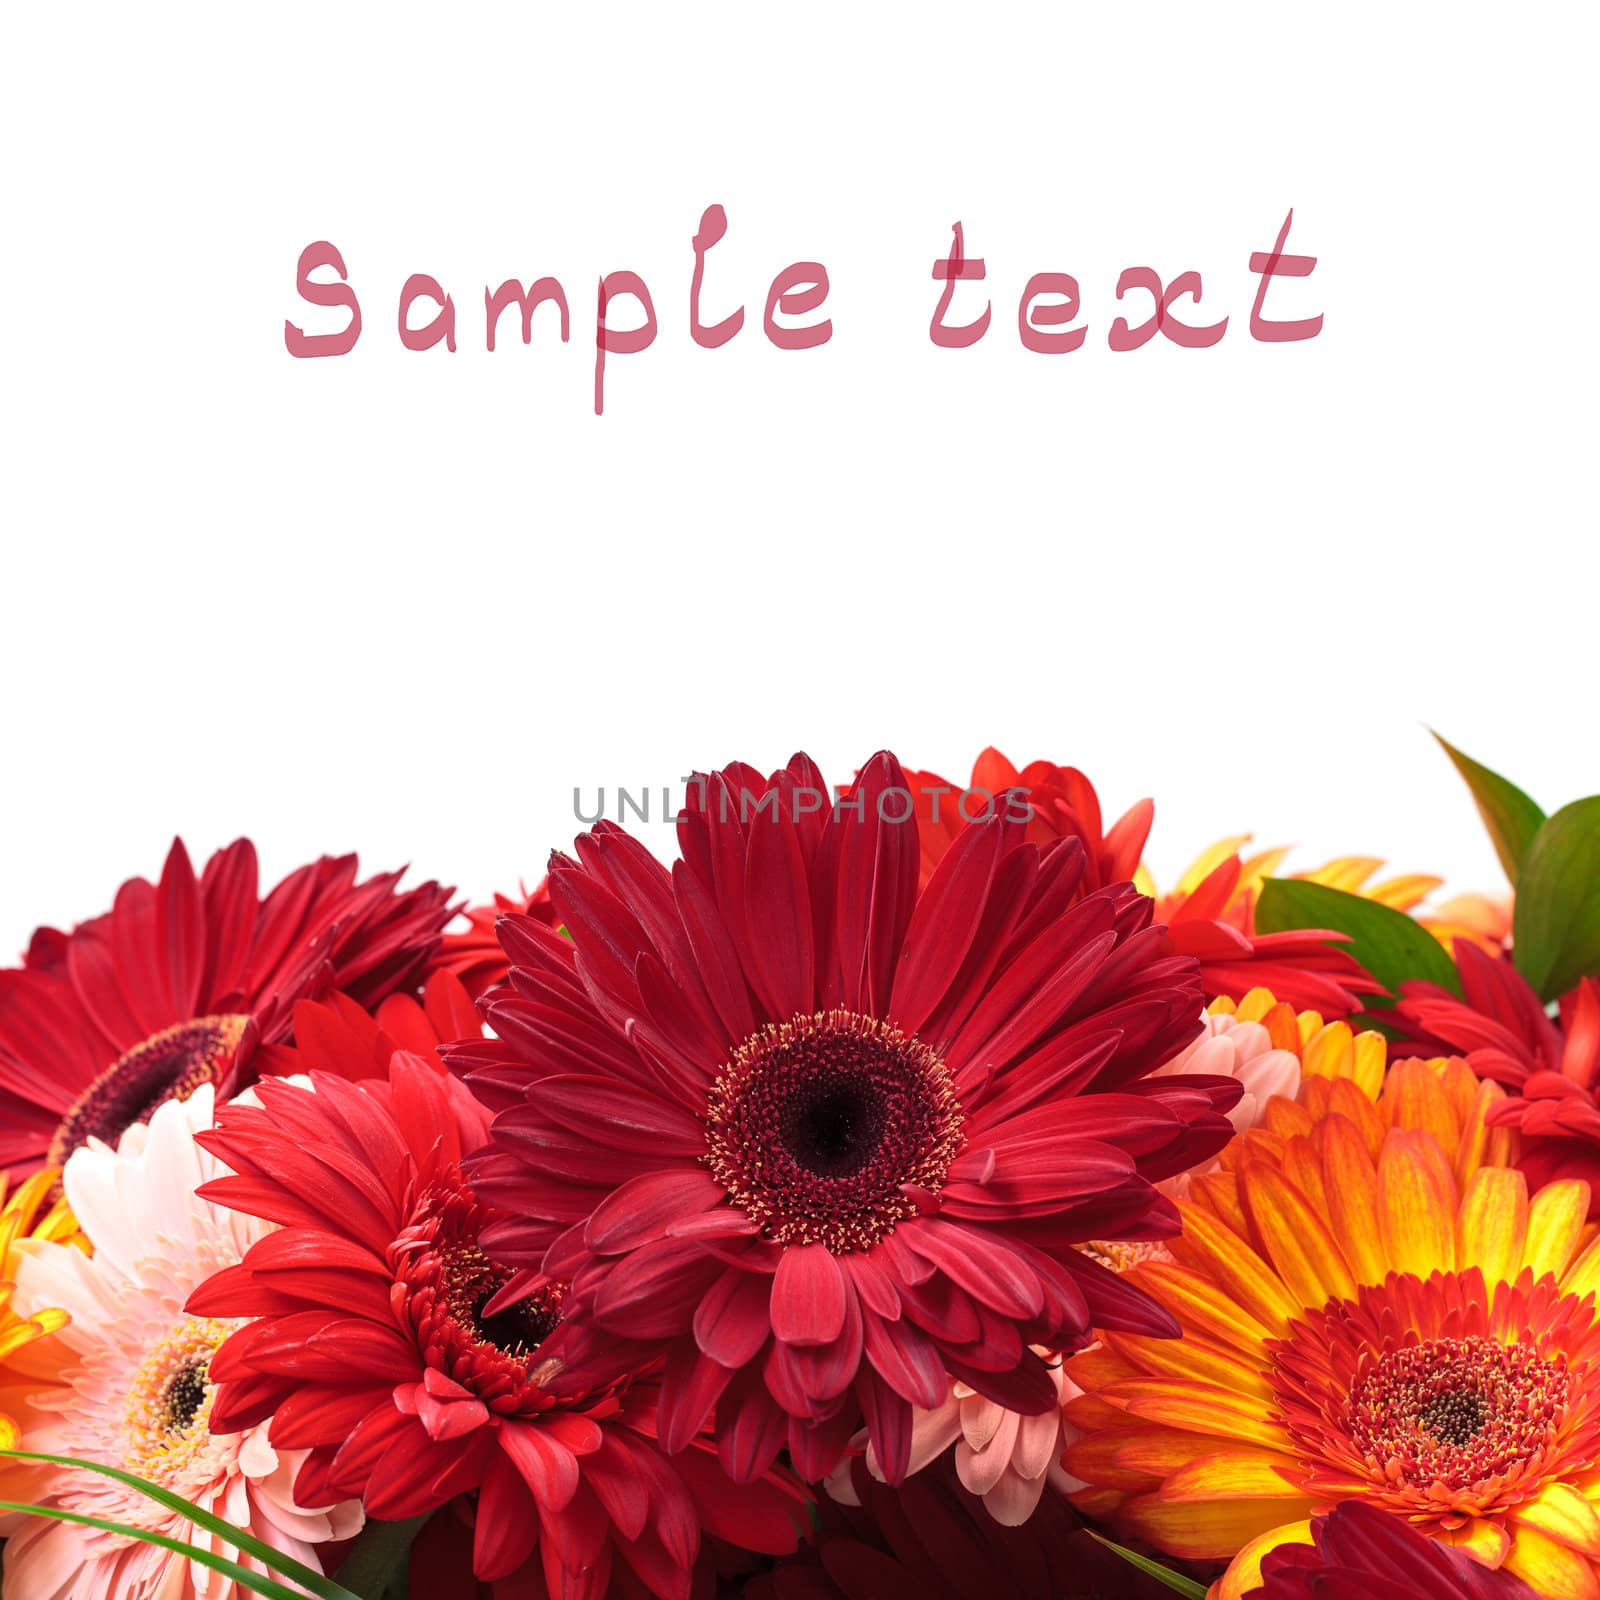 Vibrant Colorful Daisy Gerbera Flowers (with sample text)